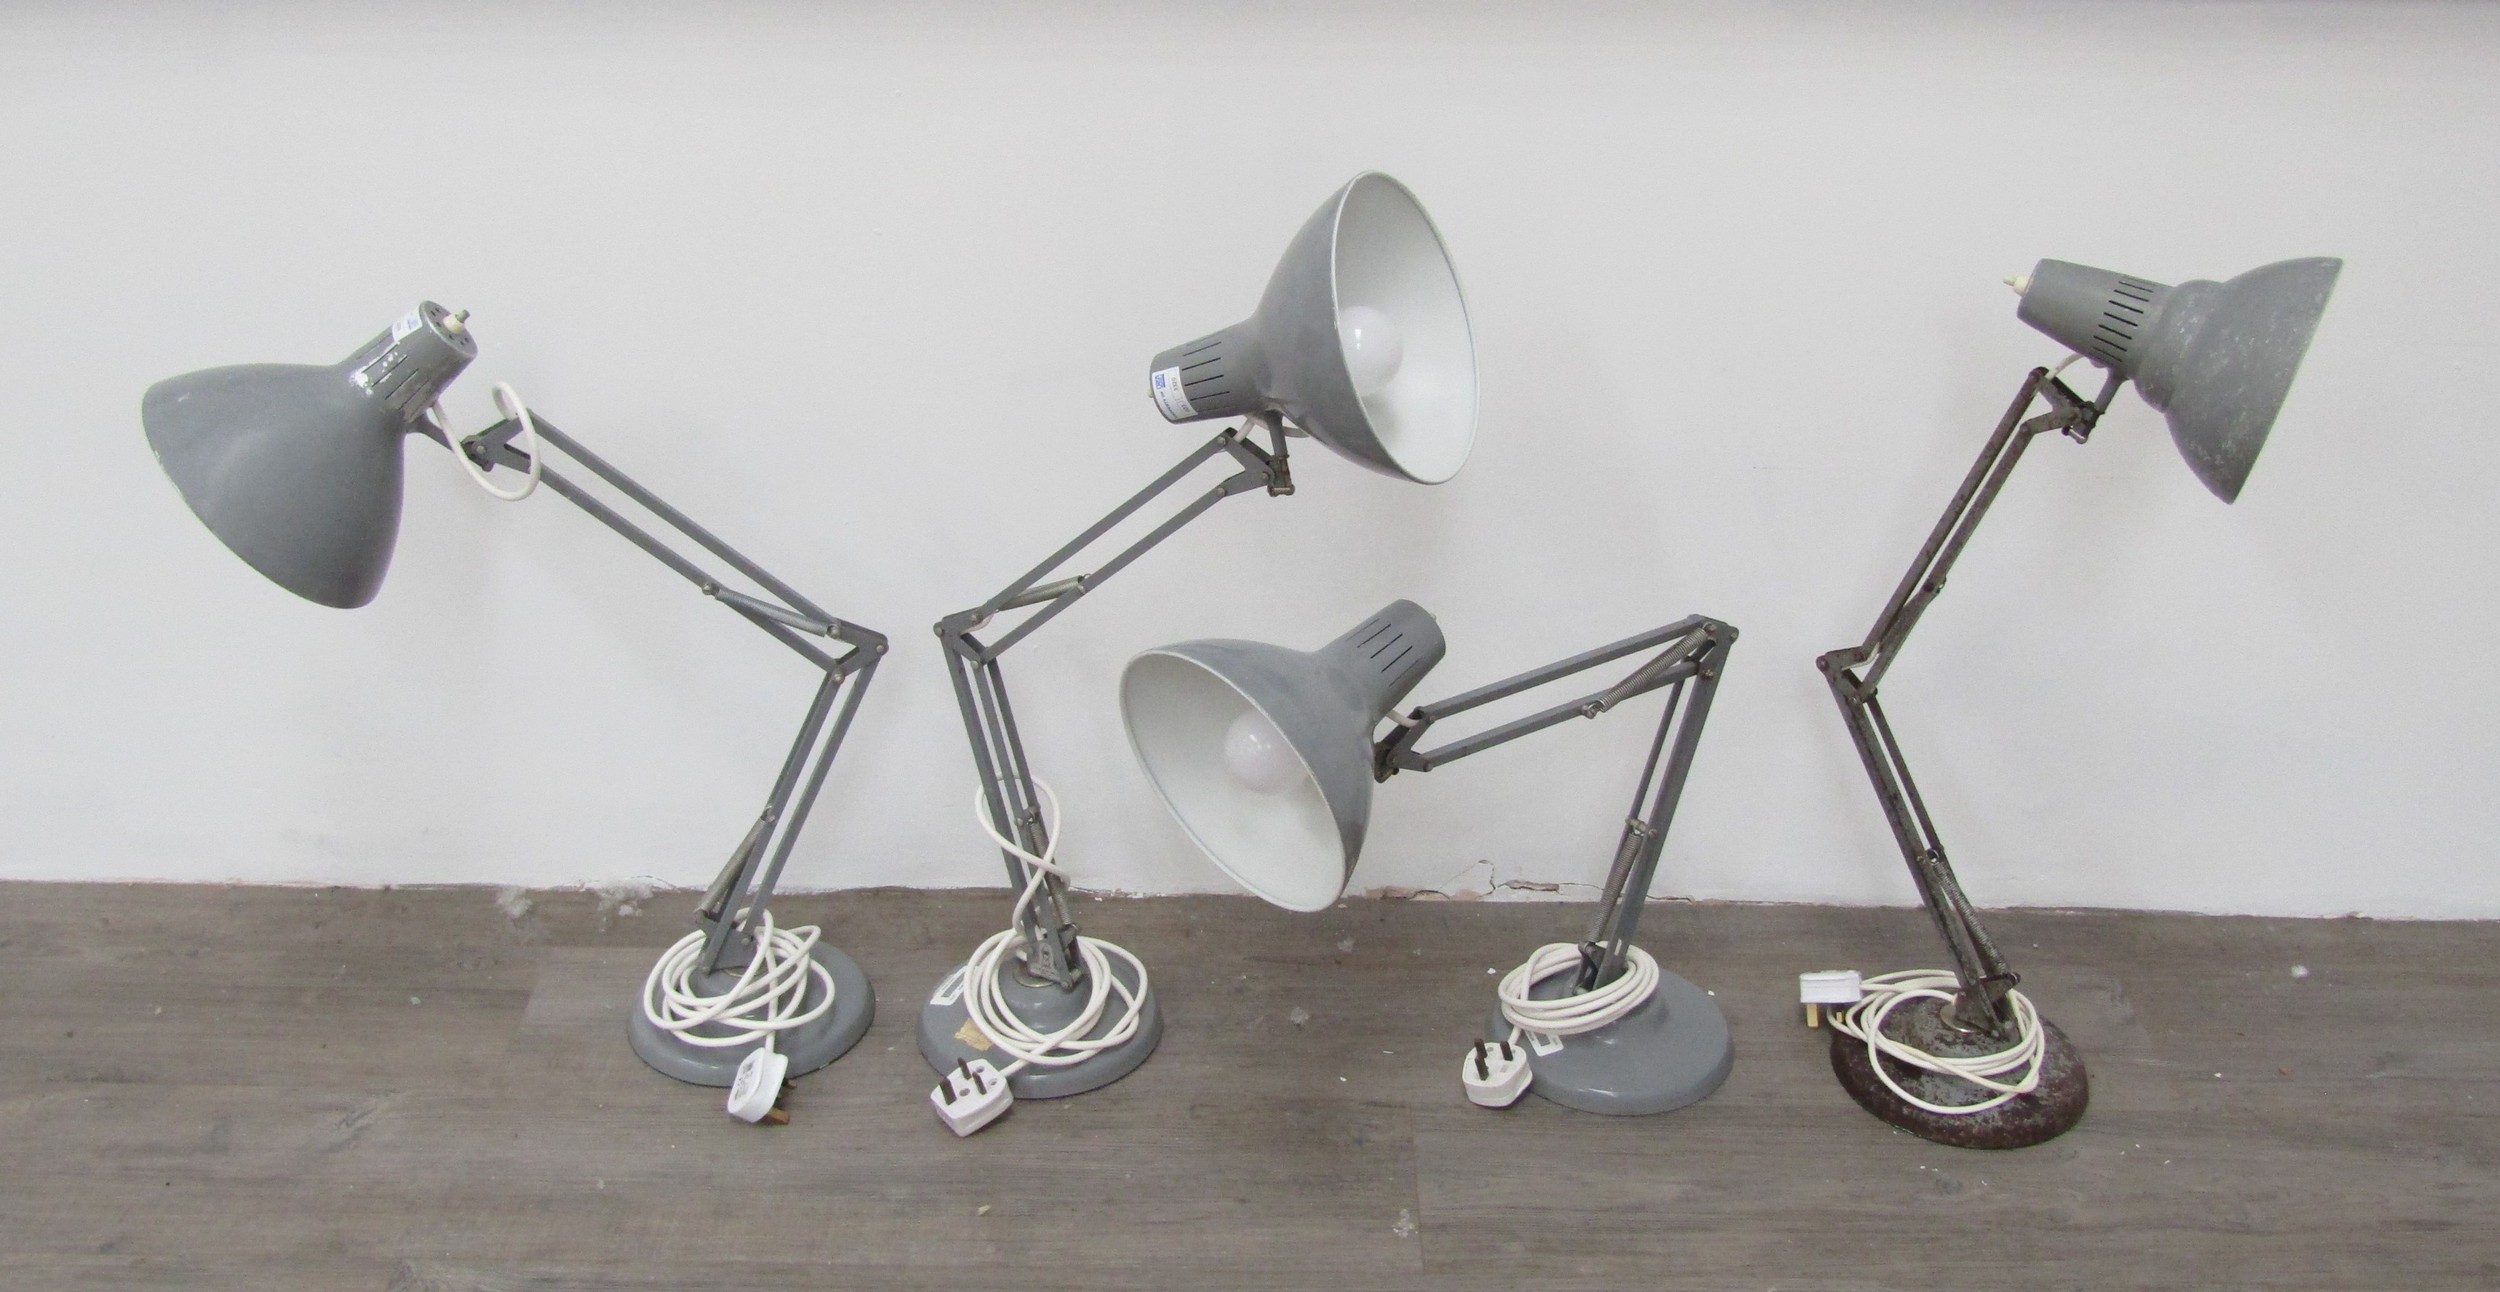 Four '1001' model angle poise lamps in grey colourway